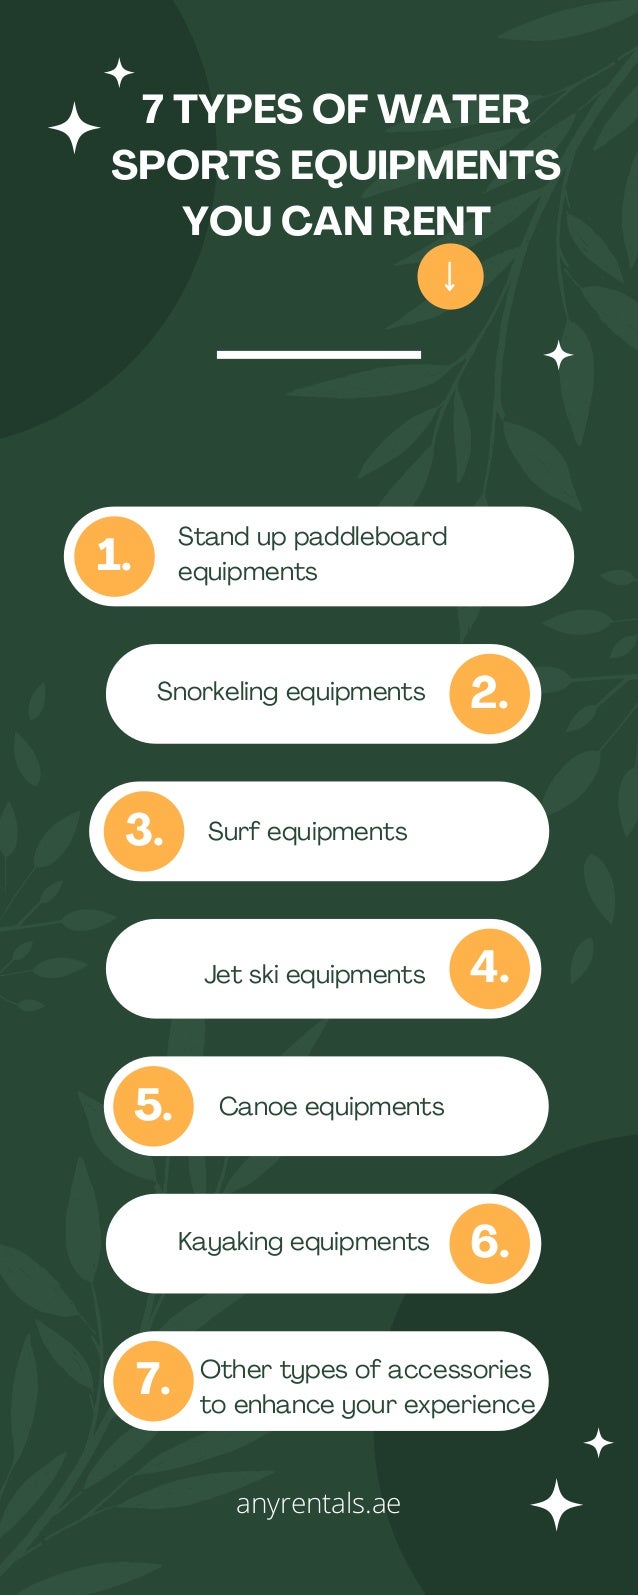 7 TYPES OF WATER
SPORTS EQUIPMENTS
YOU CAN RENT
1.
Stand up paddleboard
equipments
2.
Snorkeling equipments
4.
Jet ski equipments
6.
Kayaking equipments
3. Surf equipments
5. Canoe equipments
7. Other types of accessories
to enhance your experience
anyrentals.ae
 